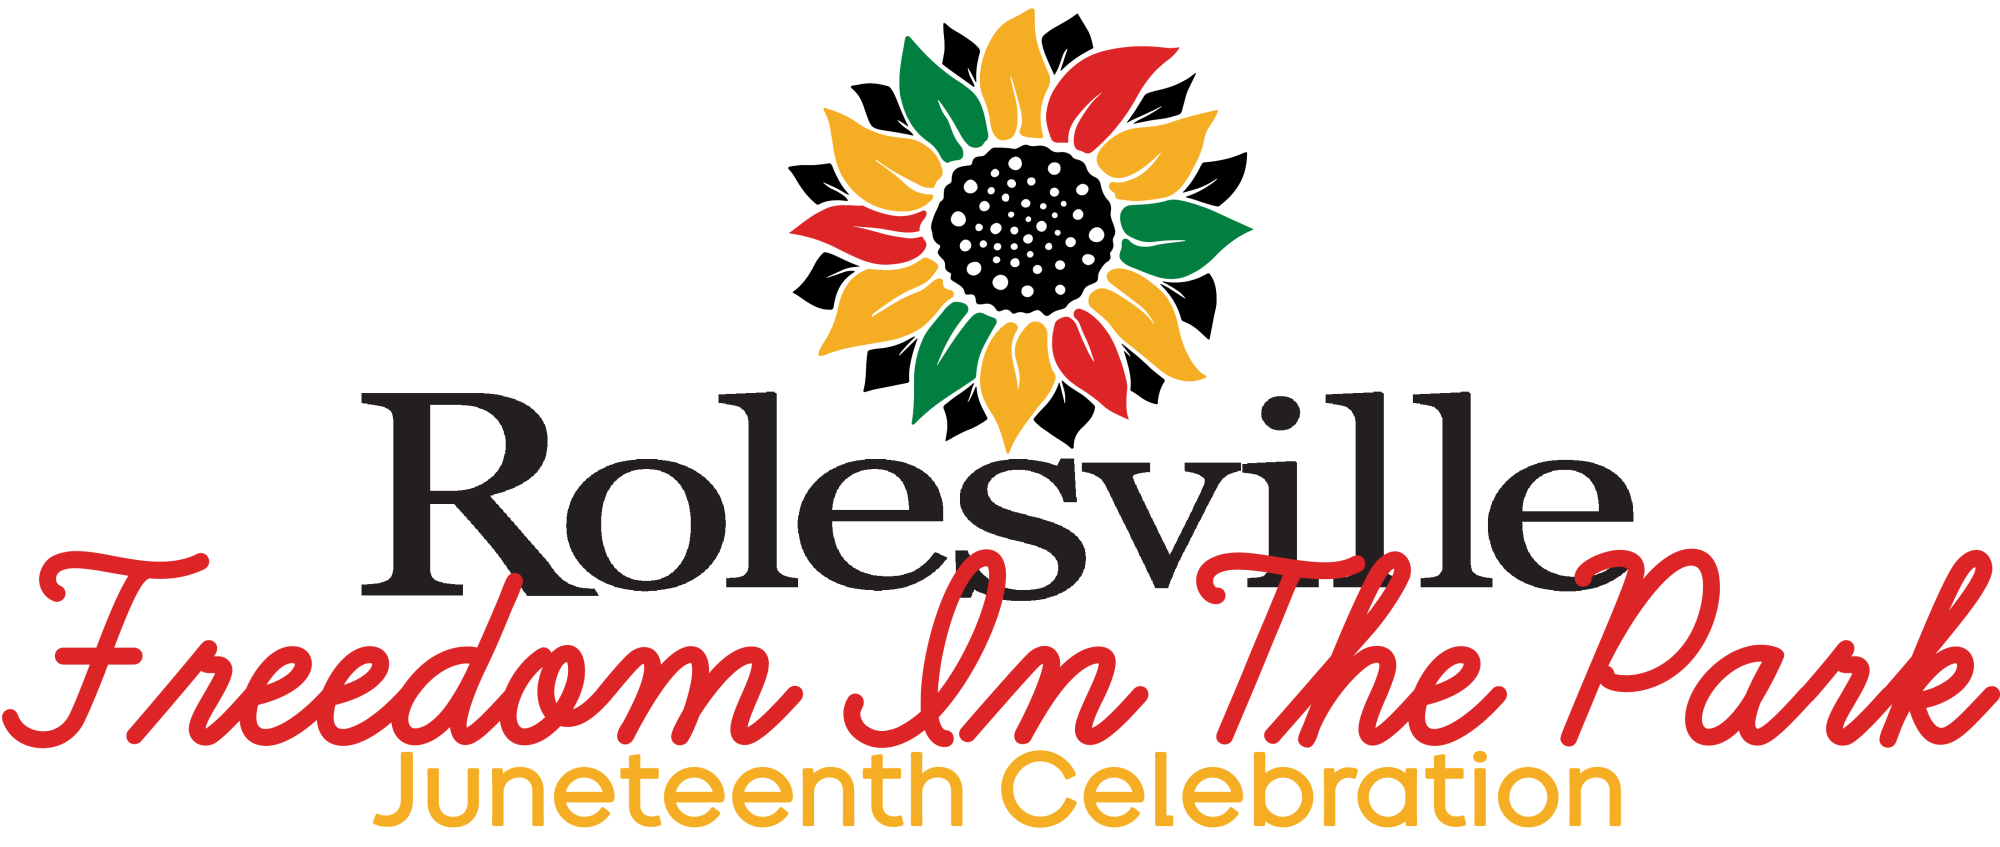 Rolesville Freedom In The Park, Juneteenth Celebration